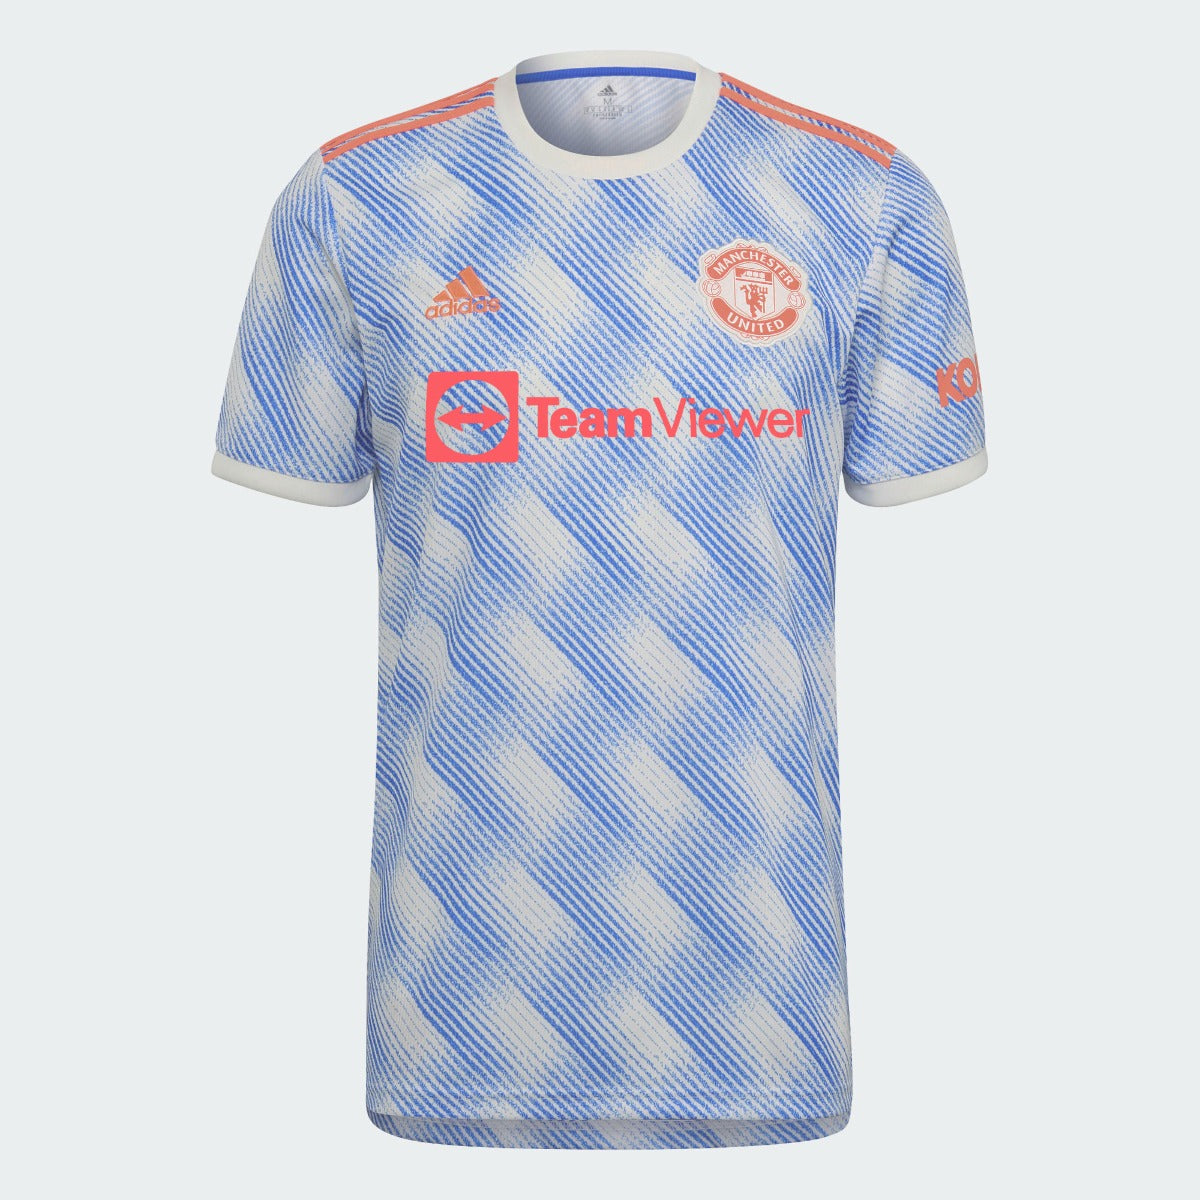 Adidas 2021-22 Manchester United Away Jersey - White-Royal